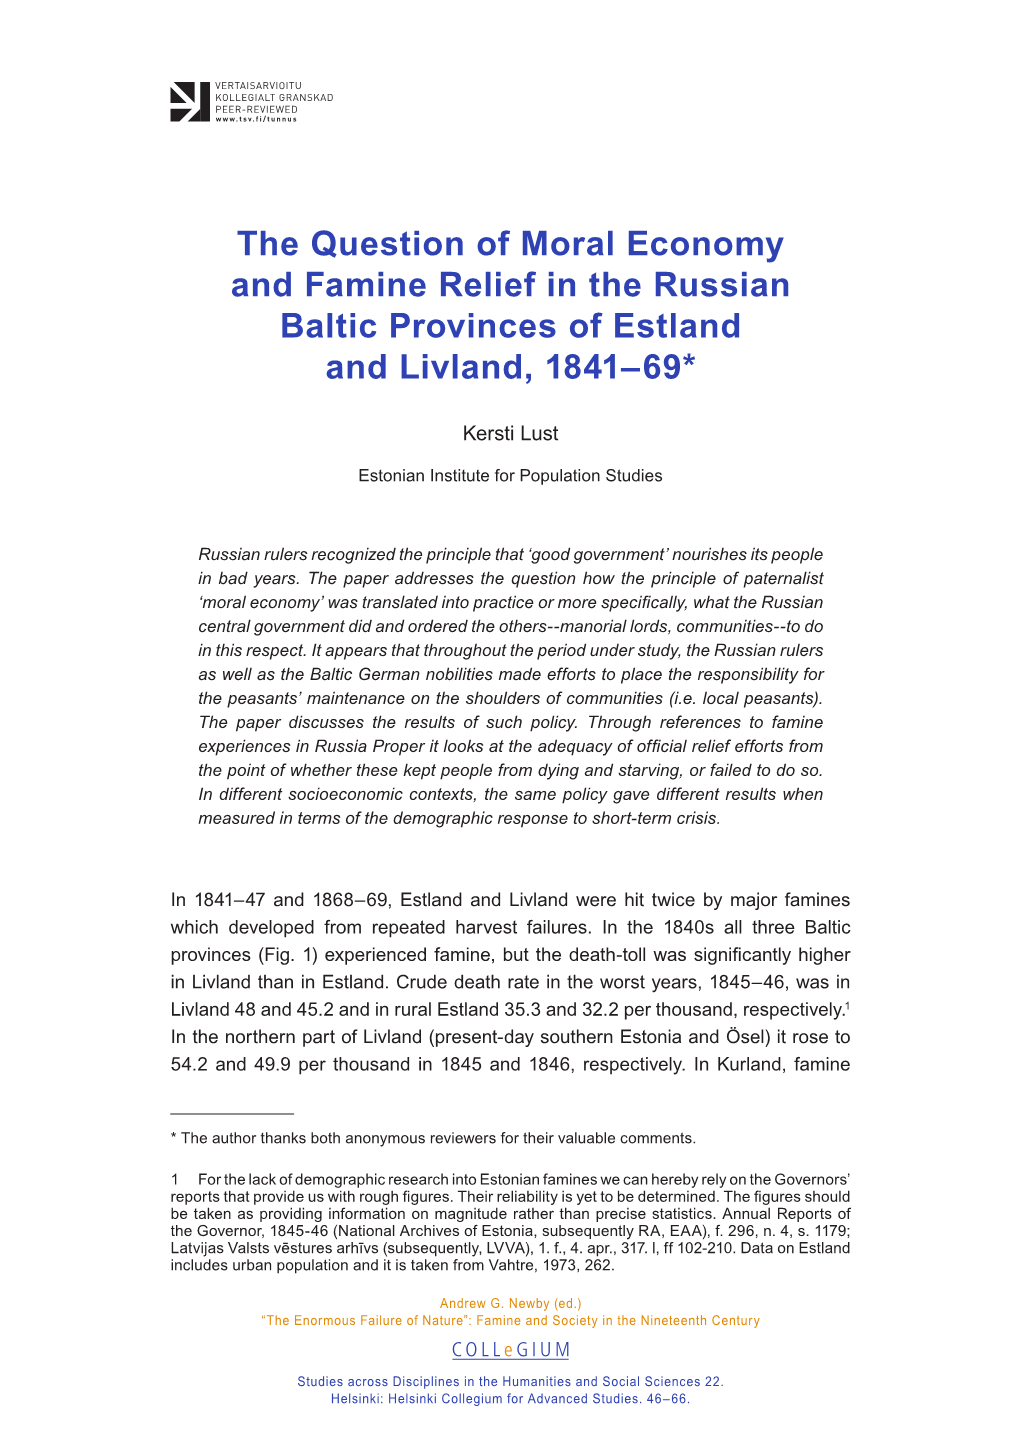 The Question of Moral Economy and Famine Relief in the Russian Baltic Provinces of Estland and Livland, 1841–69*